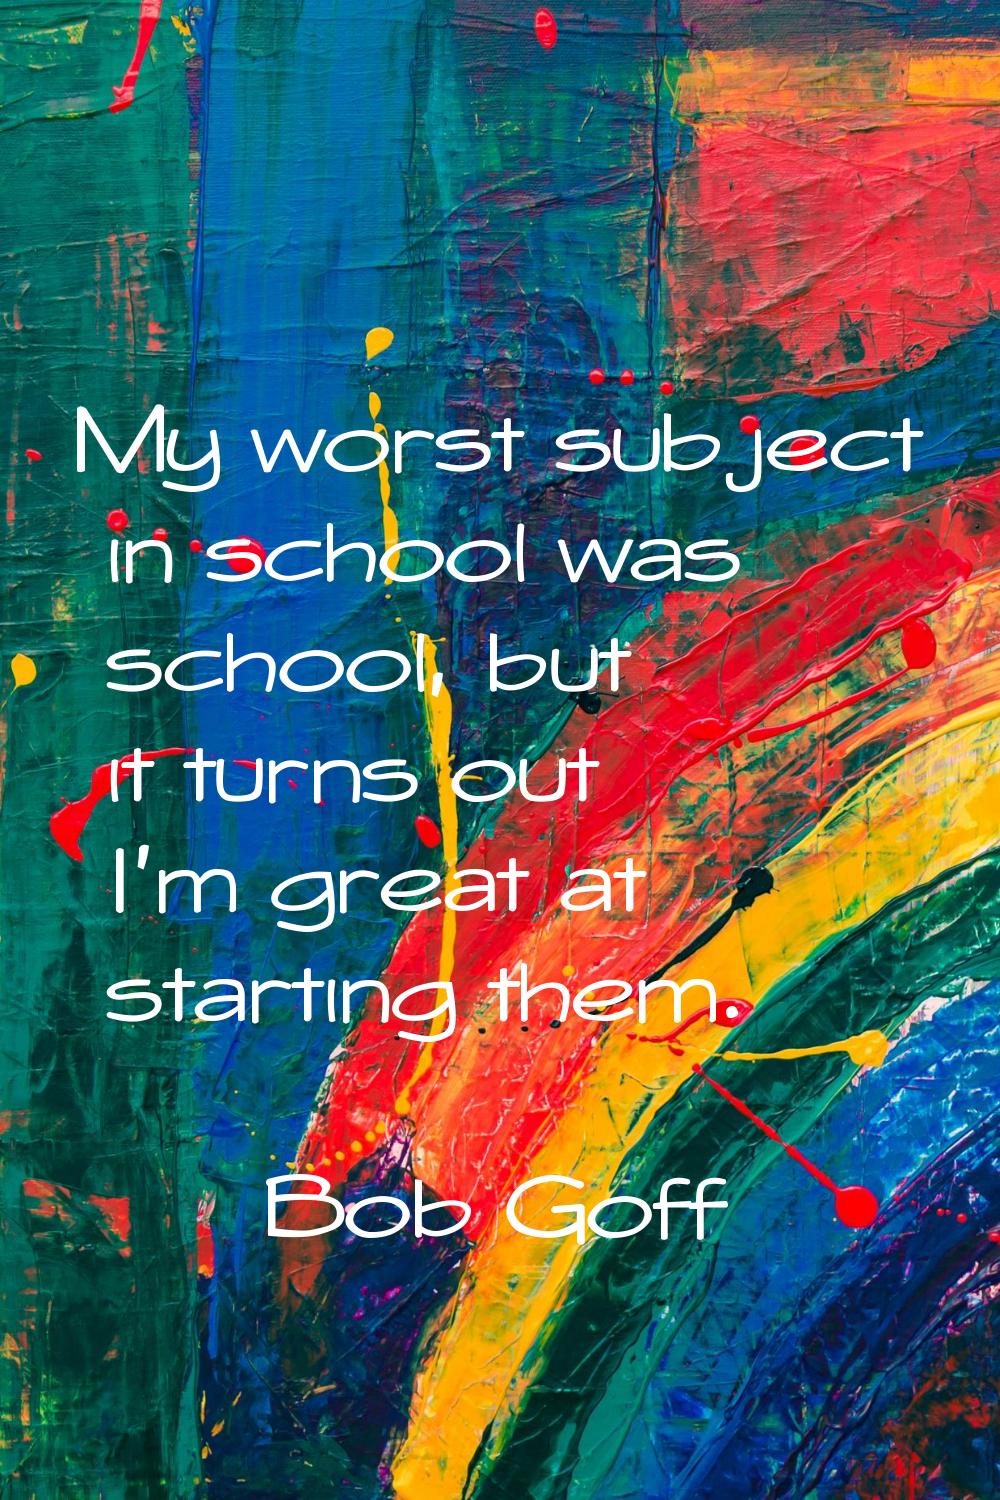 My worst subject in school was school, but it turns out I'm great at starting them.